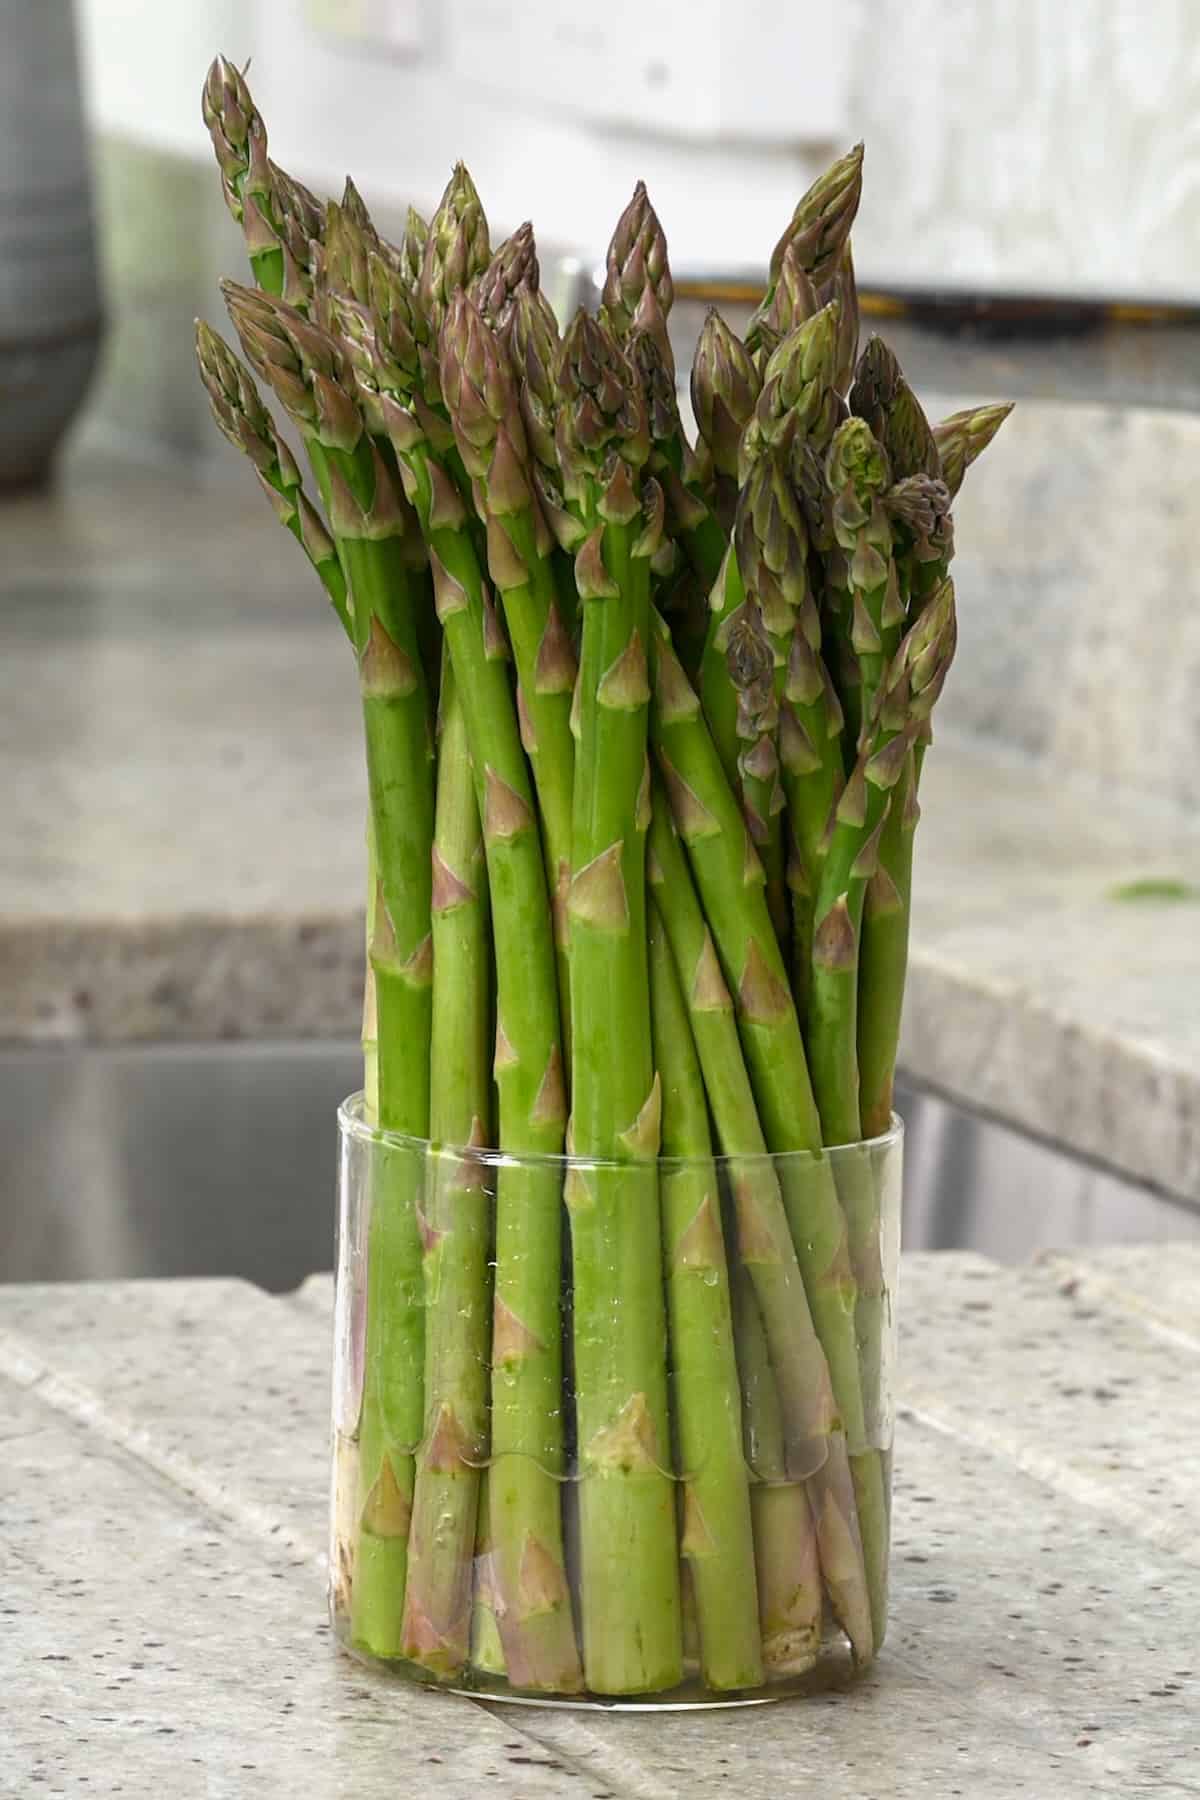 A bunch of asparagus in a small cup